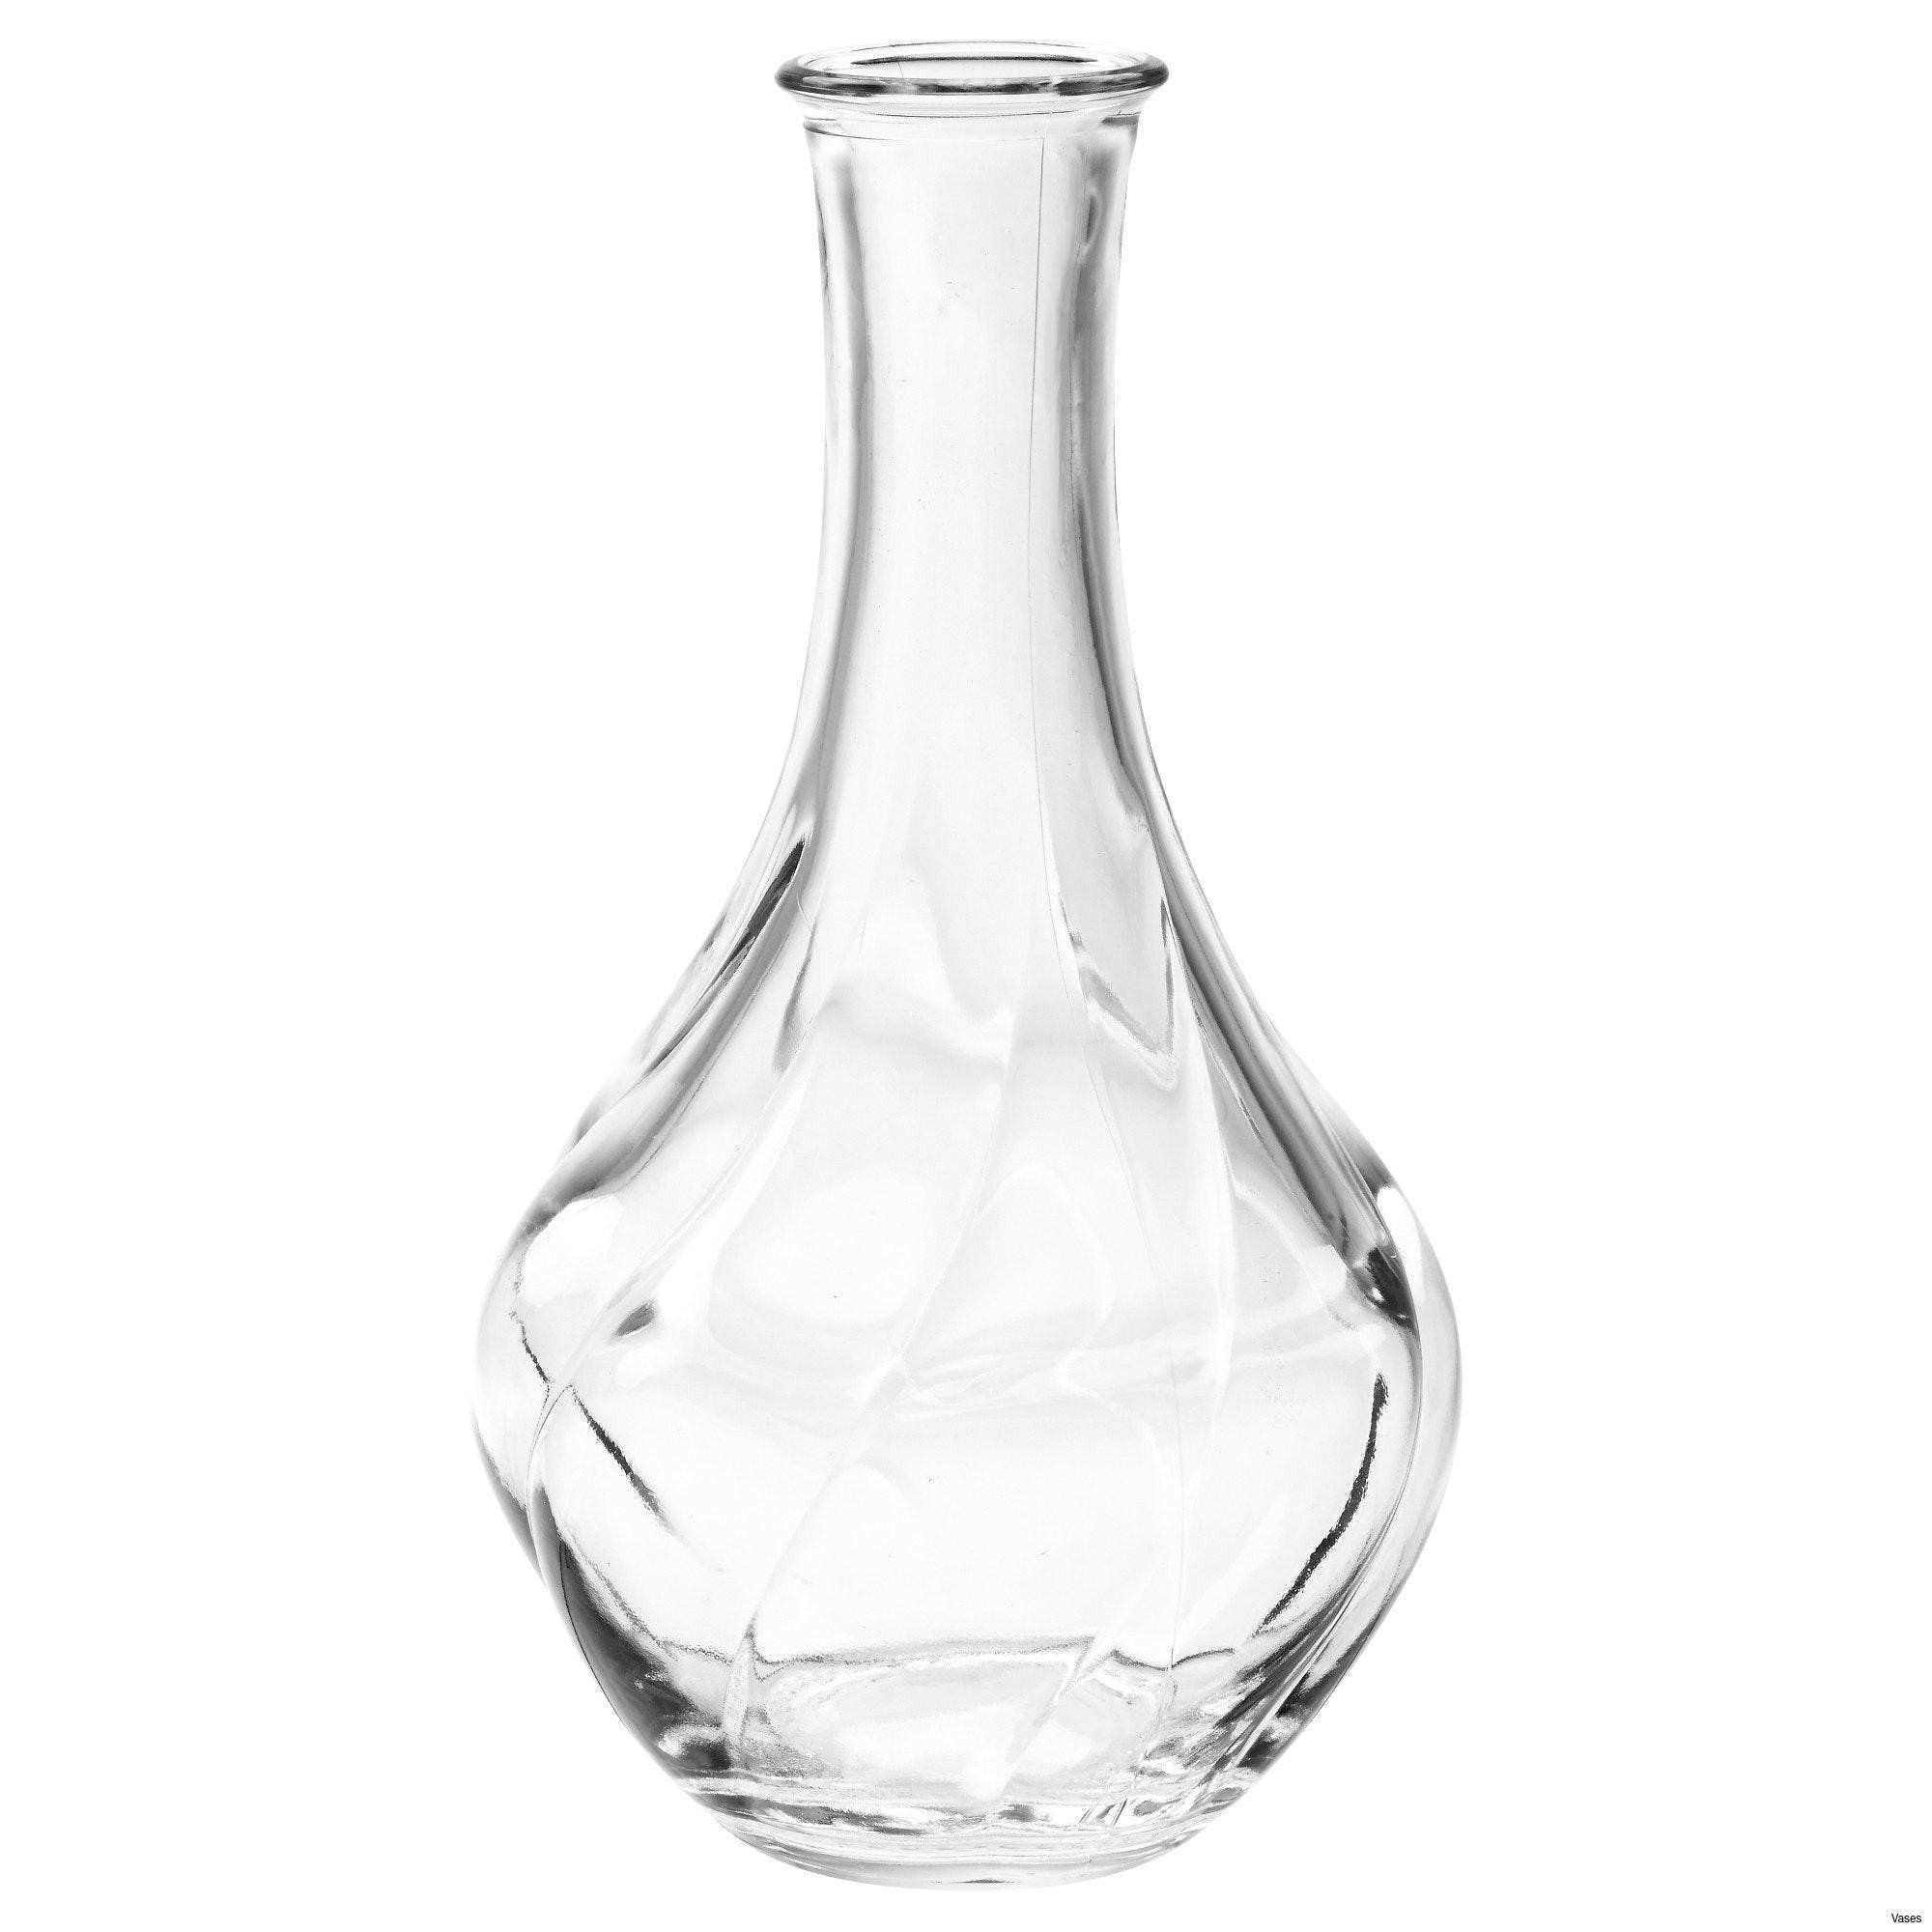 21 Famous Clear Cut Glass Vase 2024 free download clear cut glass vase of small crystal vase photograph small outdoor lights best living room pertaining to small crystal vase photograph small outdoor lights best living room glass vases fres